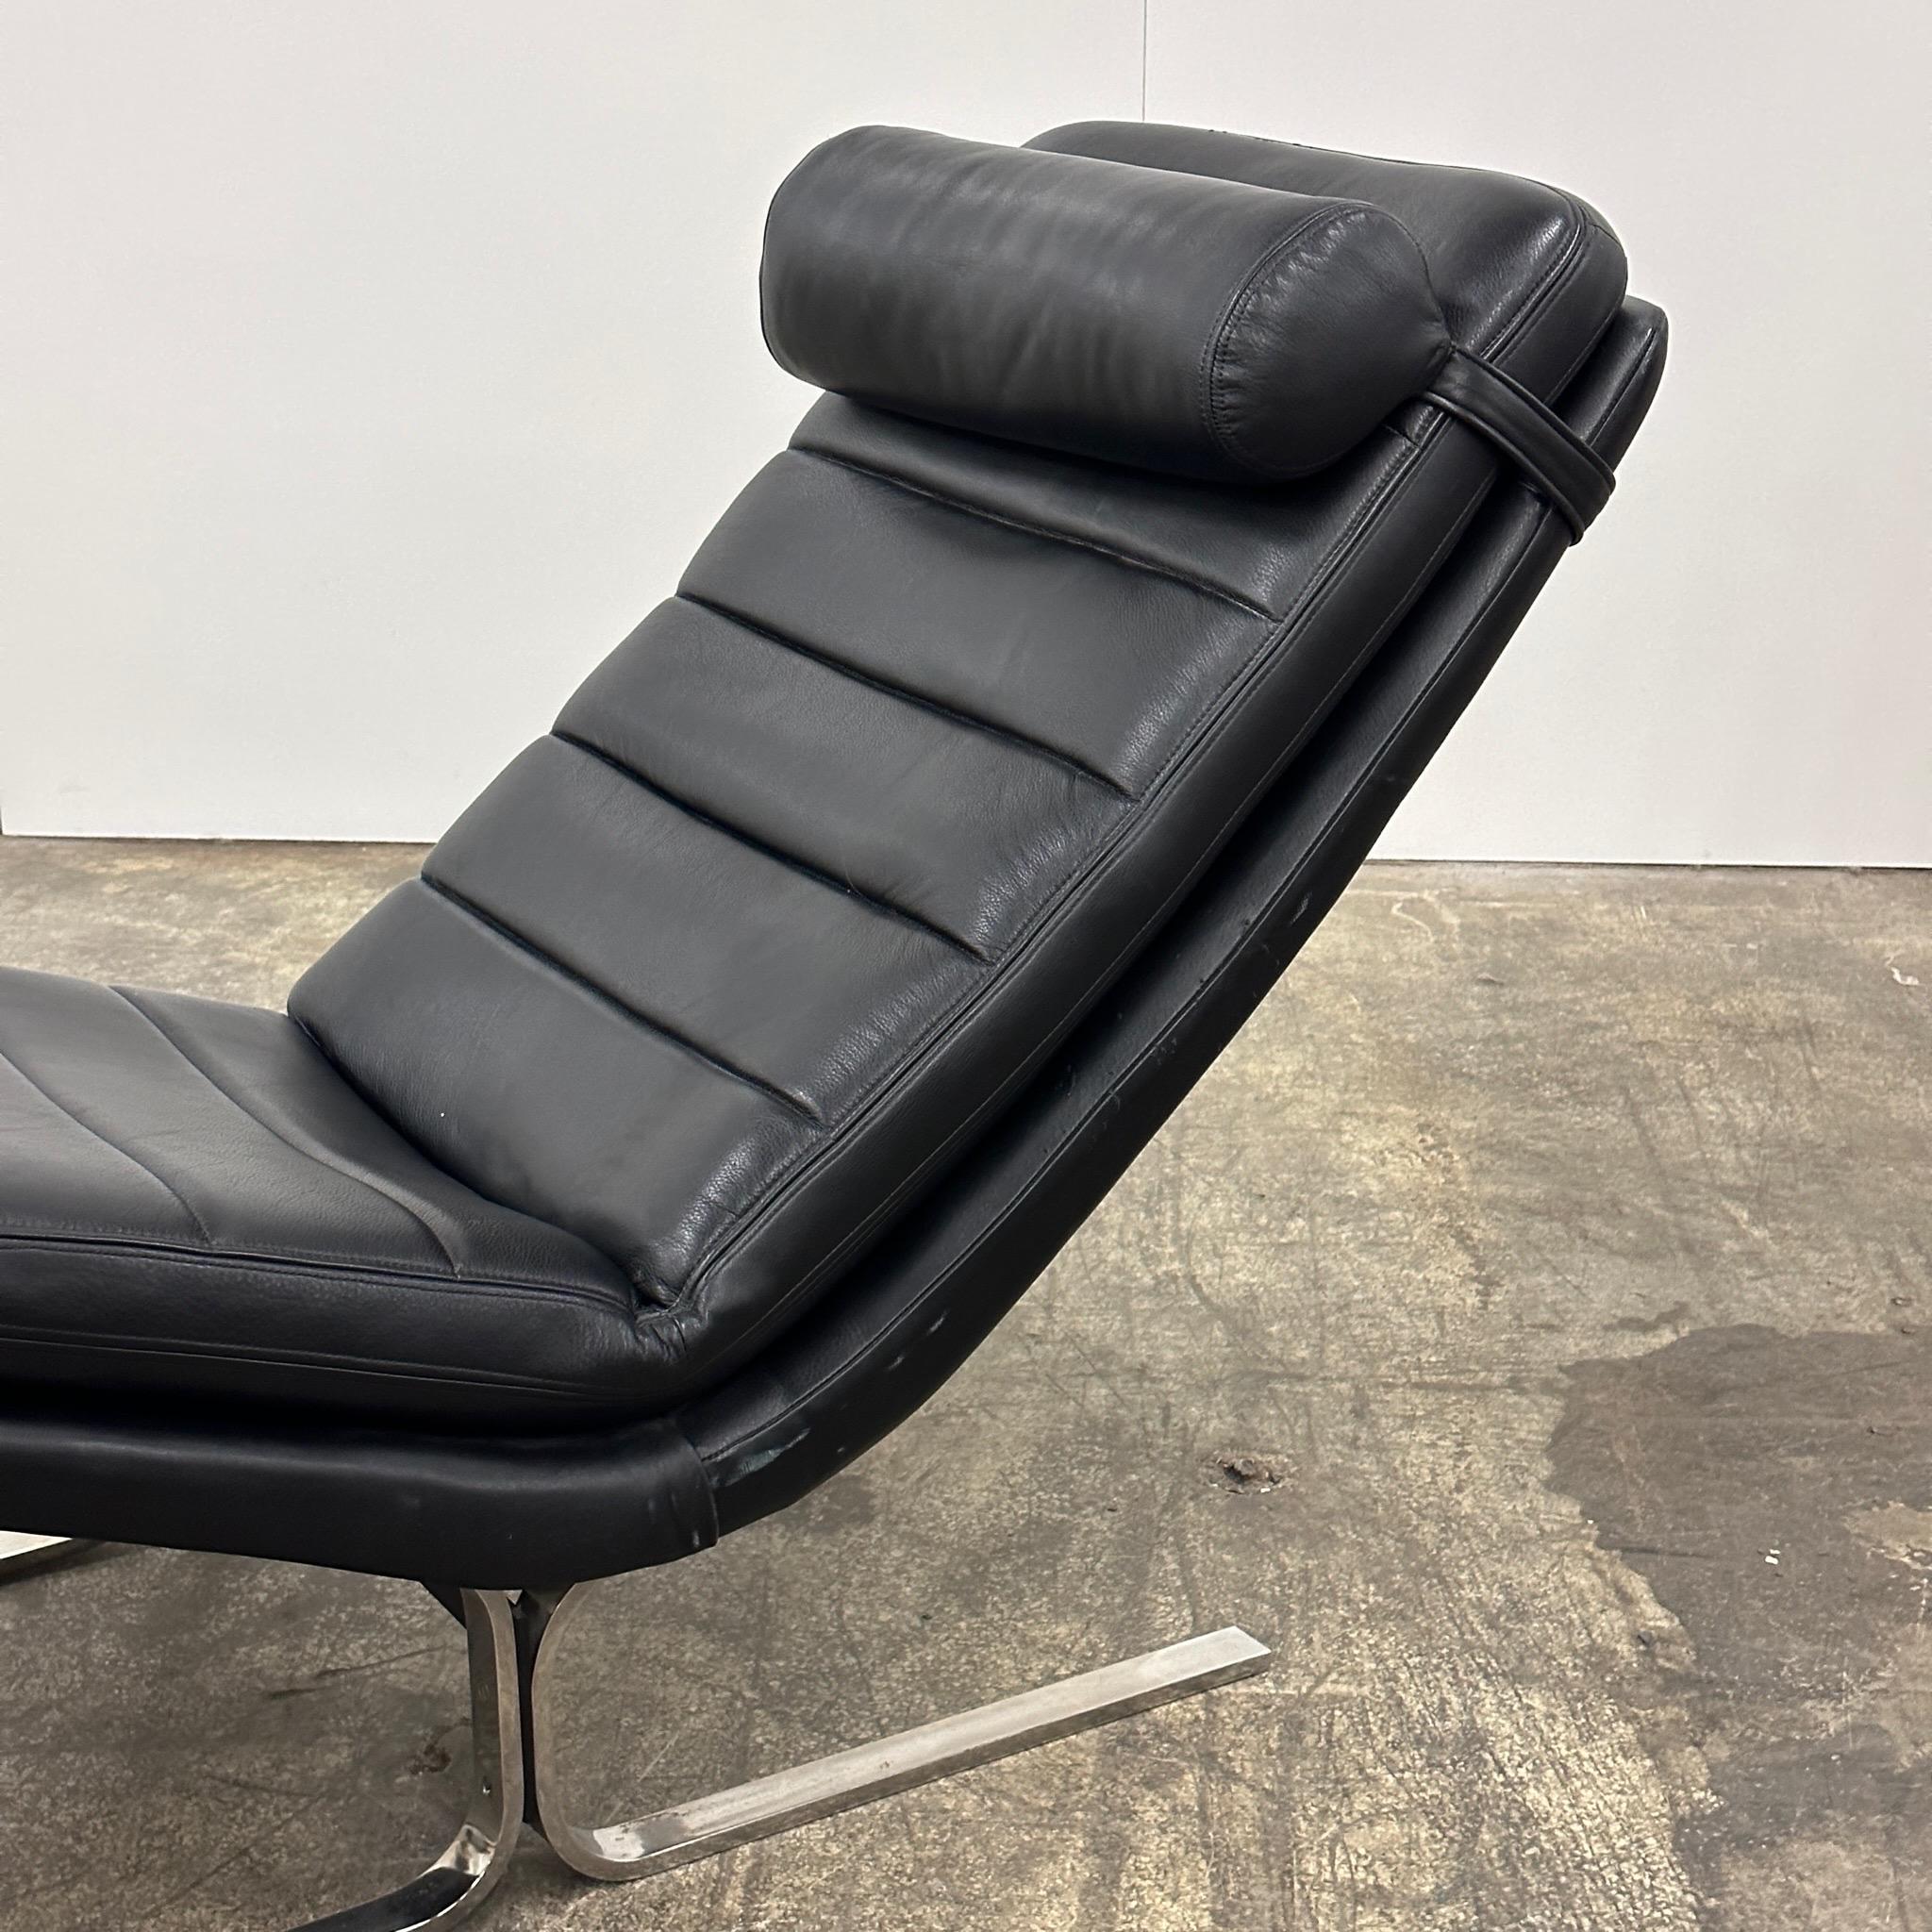 c. 1970s. Chrome legs with leather upholstery. Head rest removable. Made in North Carolina. Attributed to Harvey Probber. 